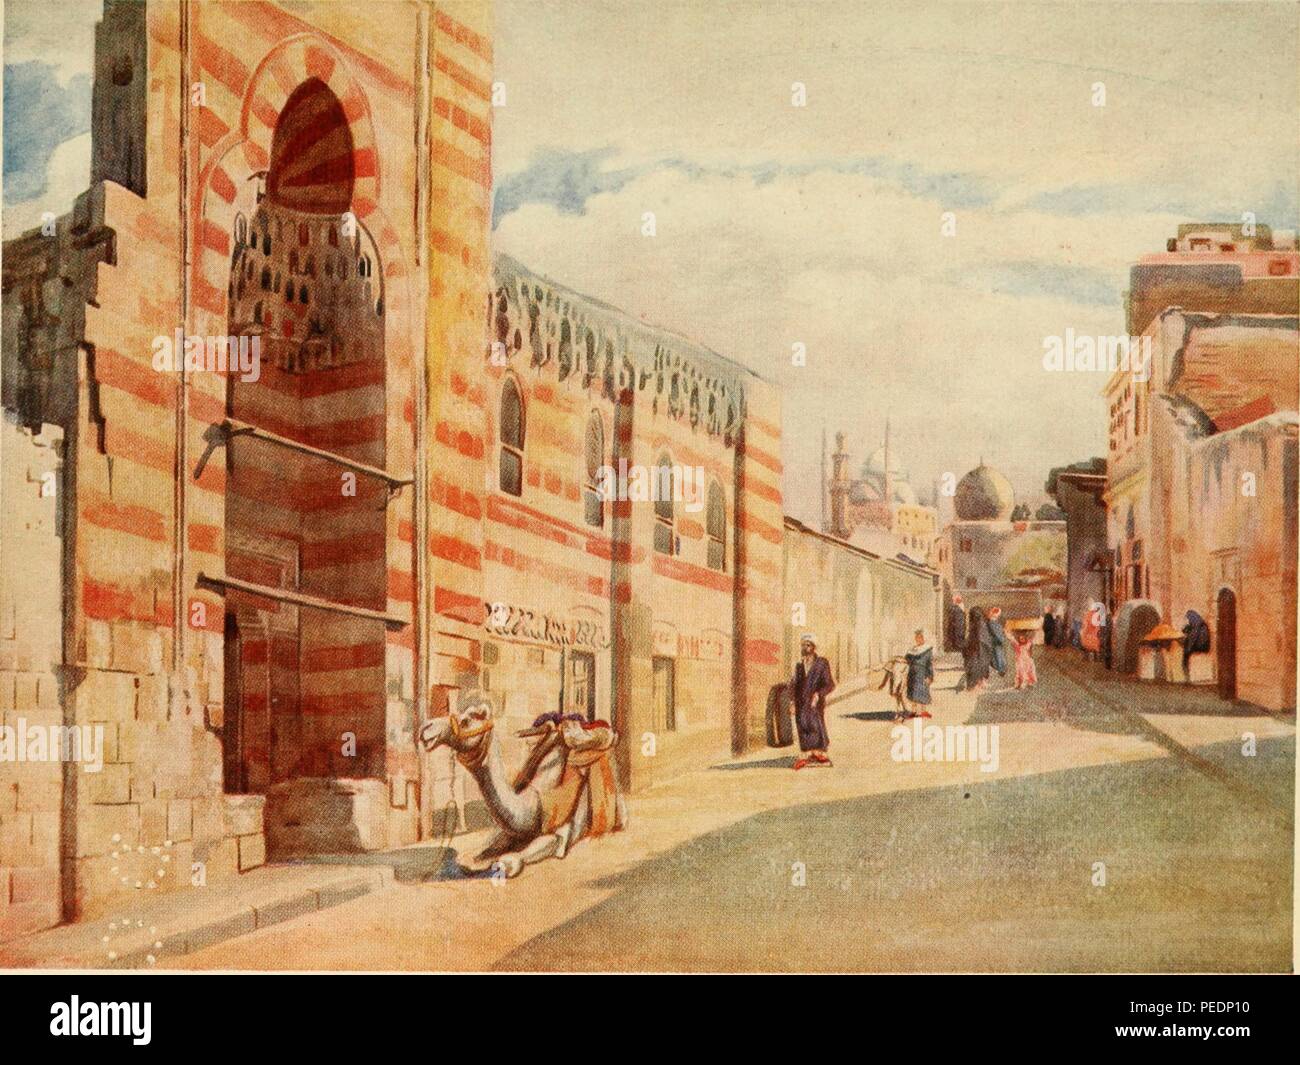 Color print depicting an early 20th-century street scene in the Sayeda Zainab quarter of old Cairo, Egypt, with a saddled camel seated in front of the high, arched entrance portal to a Mamluk style mosque, with its characteristic ablaq decorative technique layering light and dark blocks of stone, 1912. Courtesy Internet Archive. () Stock Photo